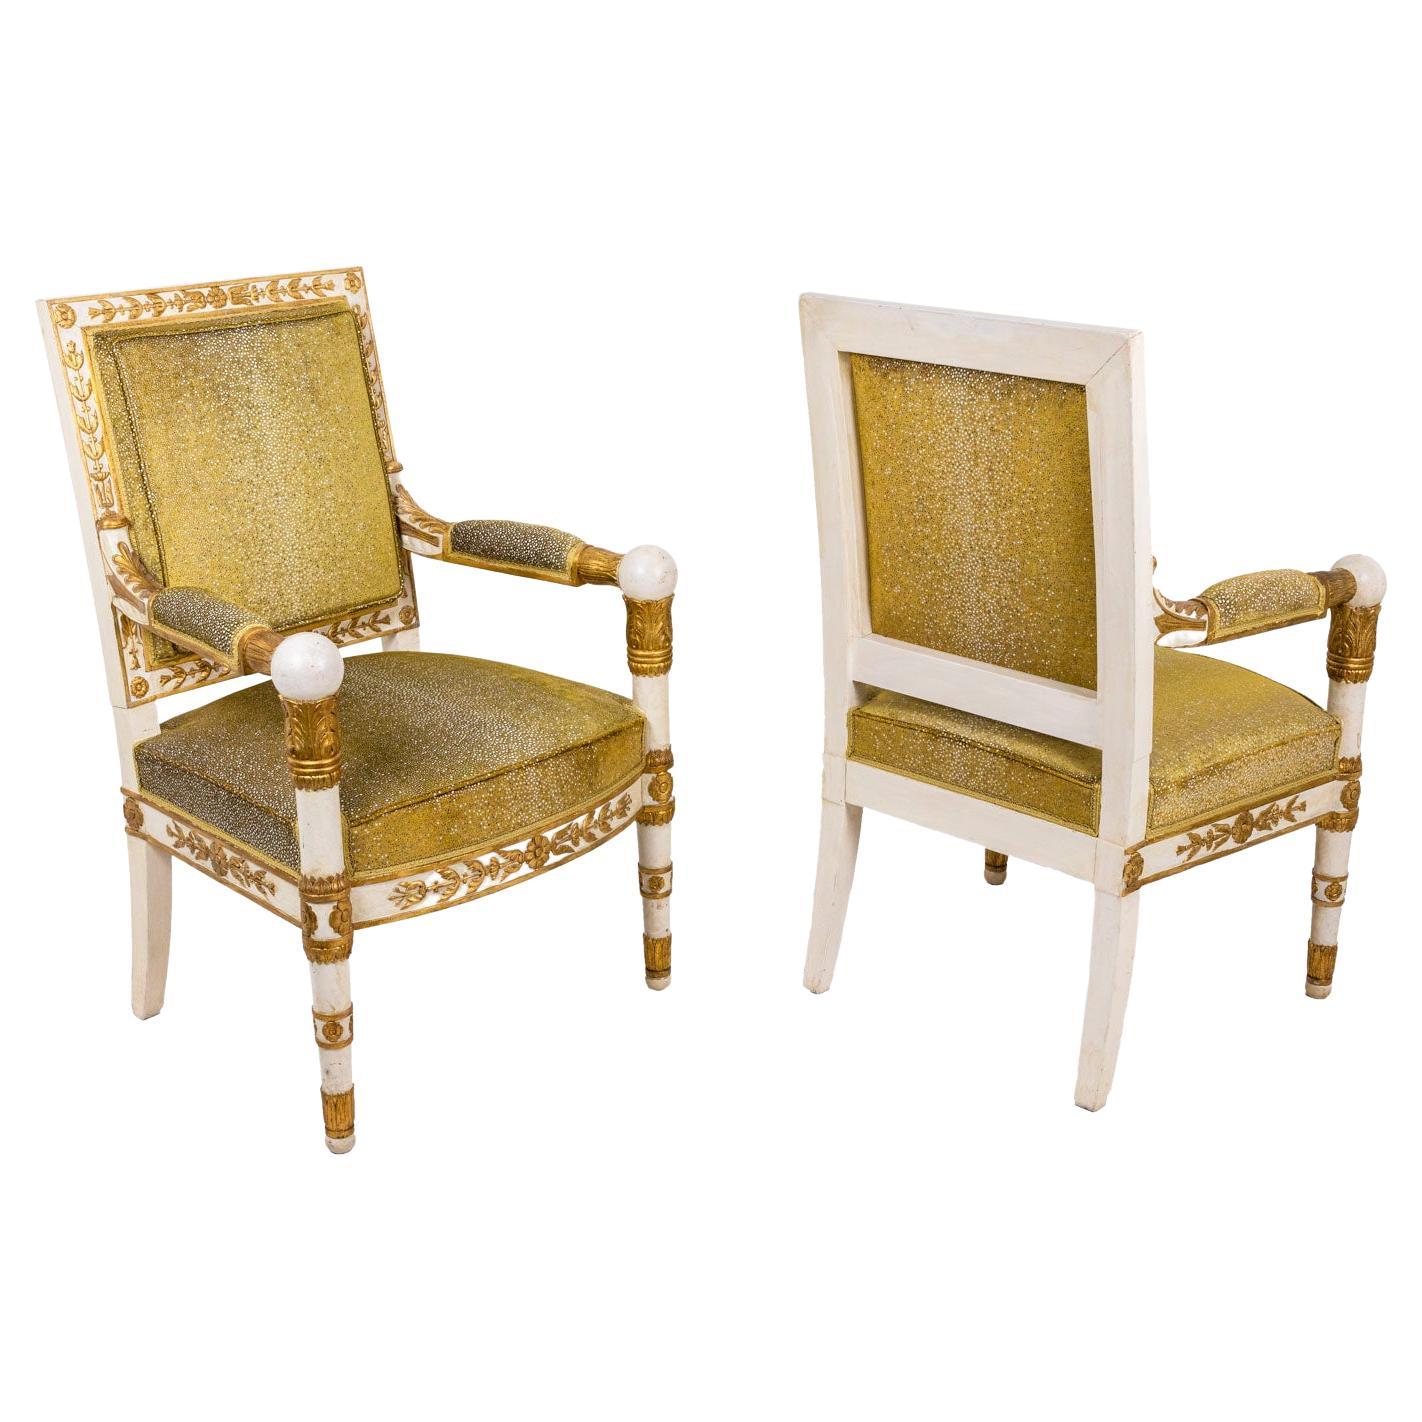 Empire Style White and Gold Pair of Armchairs, Sharkskin Style Trim, 1950s For Sale